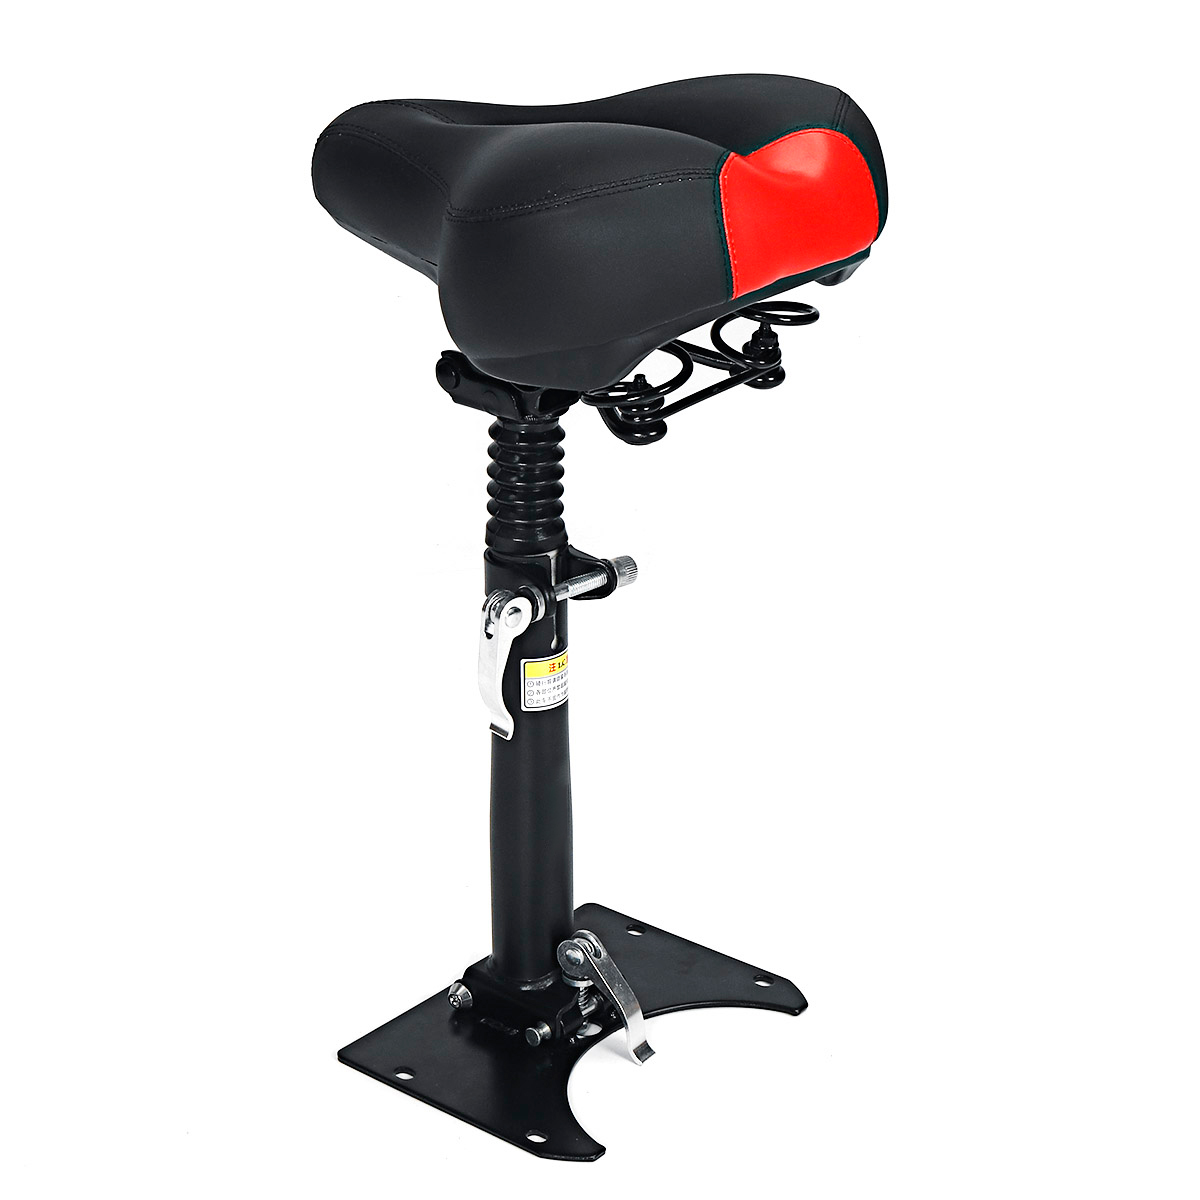 Find Electric Scooter Saddle Seat Professional Breathable 43 60cm Adjustable High Shock Absorbing Folding Chair Cushion for LAOTIE ES18 ES18P ES19 TI30 for Sale on Gipsybee.com with cryptocurrencies